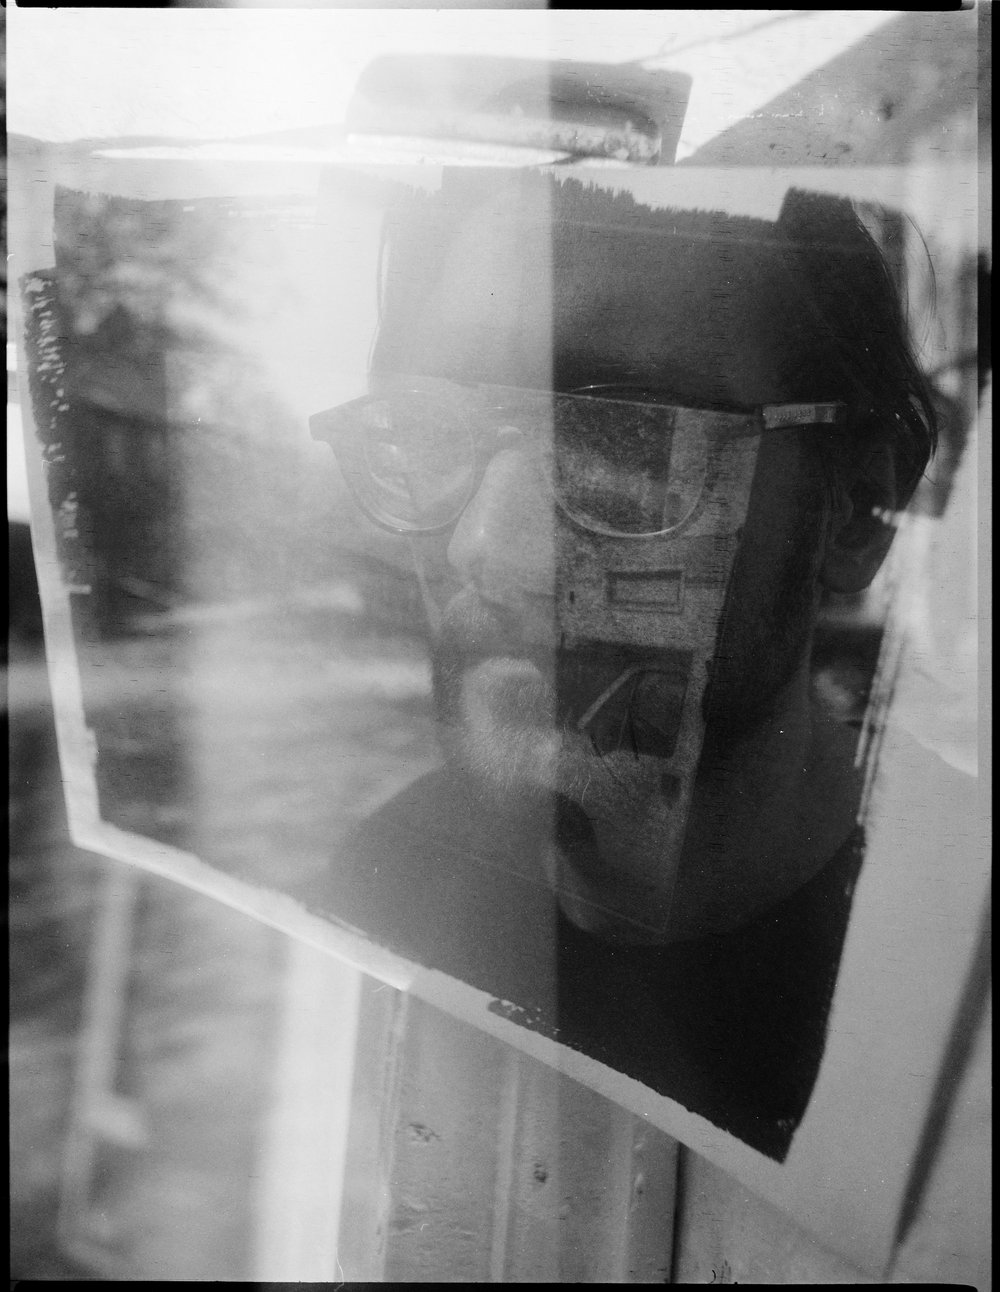 “Armands Andze in his uranotype” by Arturs Lurins